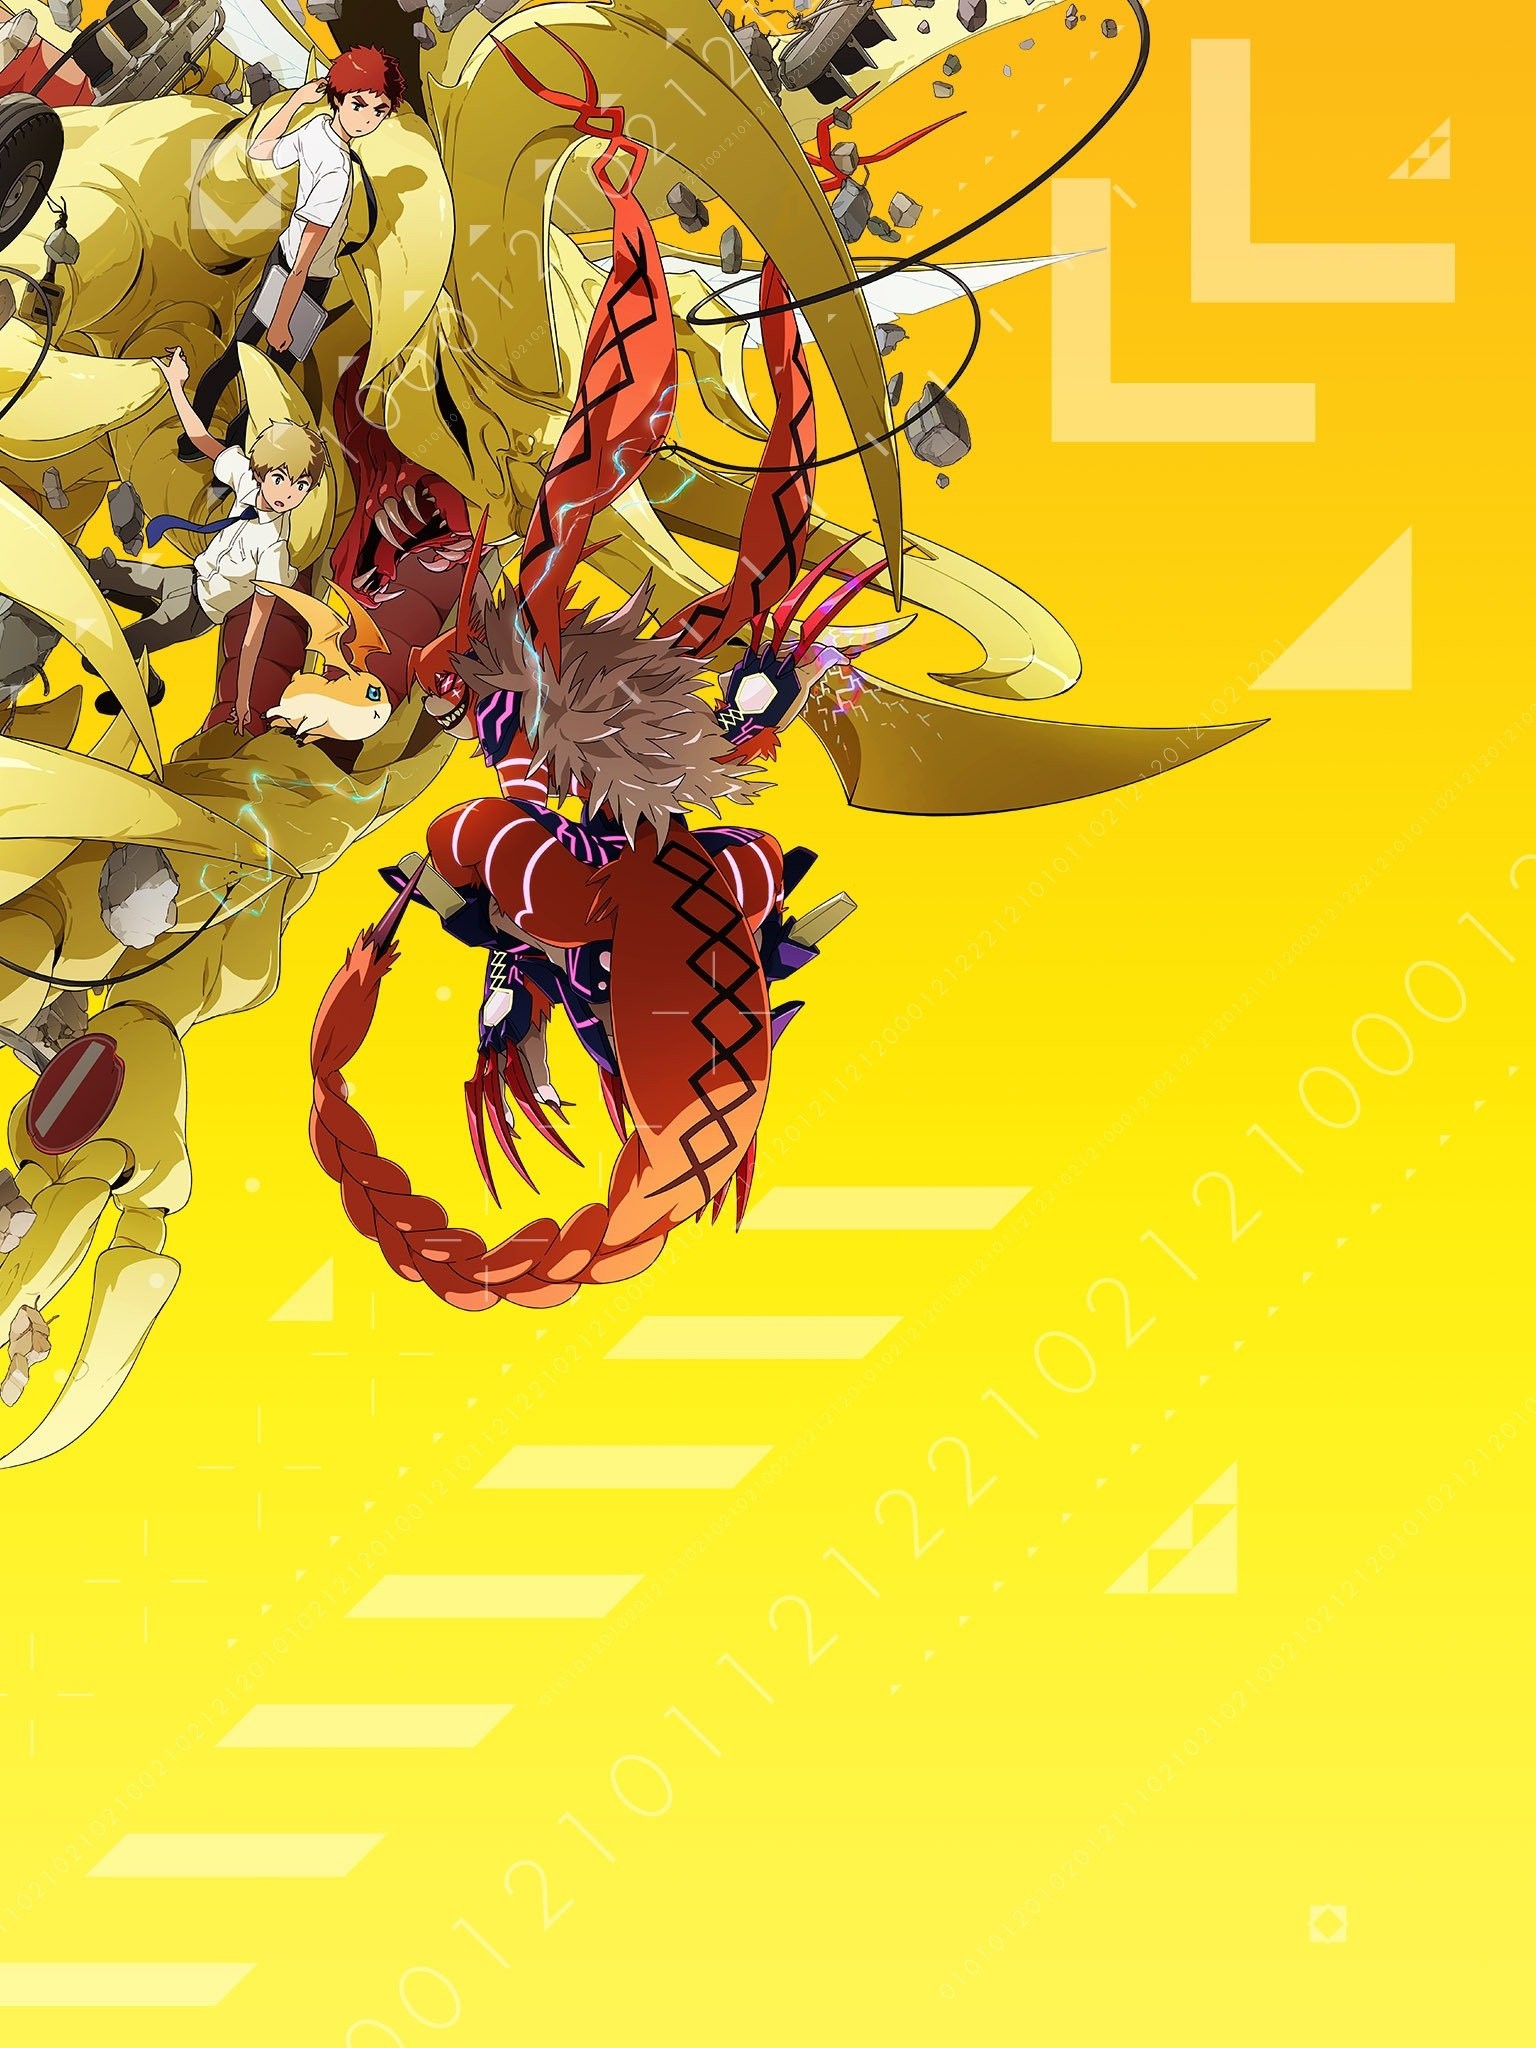 Anime Trending - Approximately 1 week ago Digimon Adventure Tri (the first  part) came out. Did you watch it? If so, what did you think about it? I  personally enjoyed it. Though